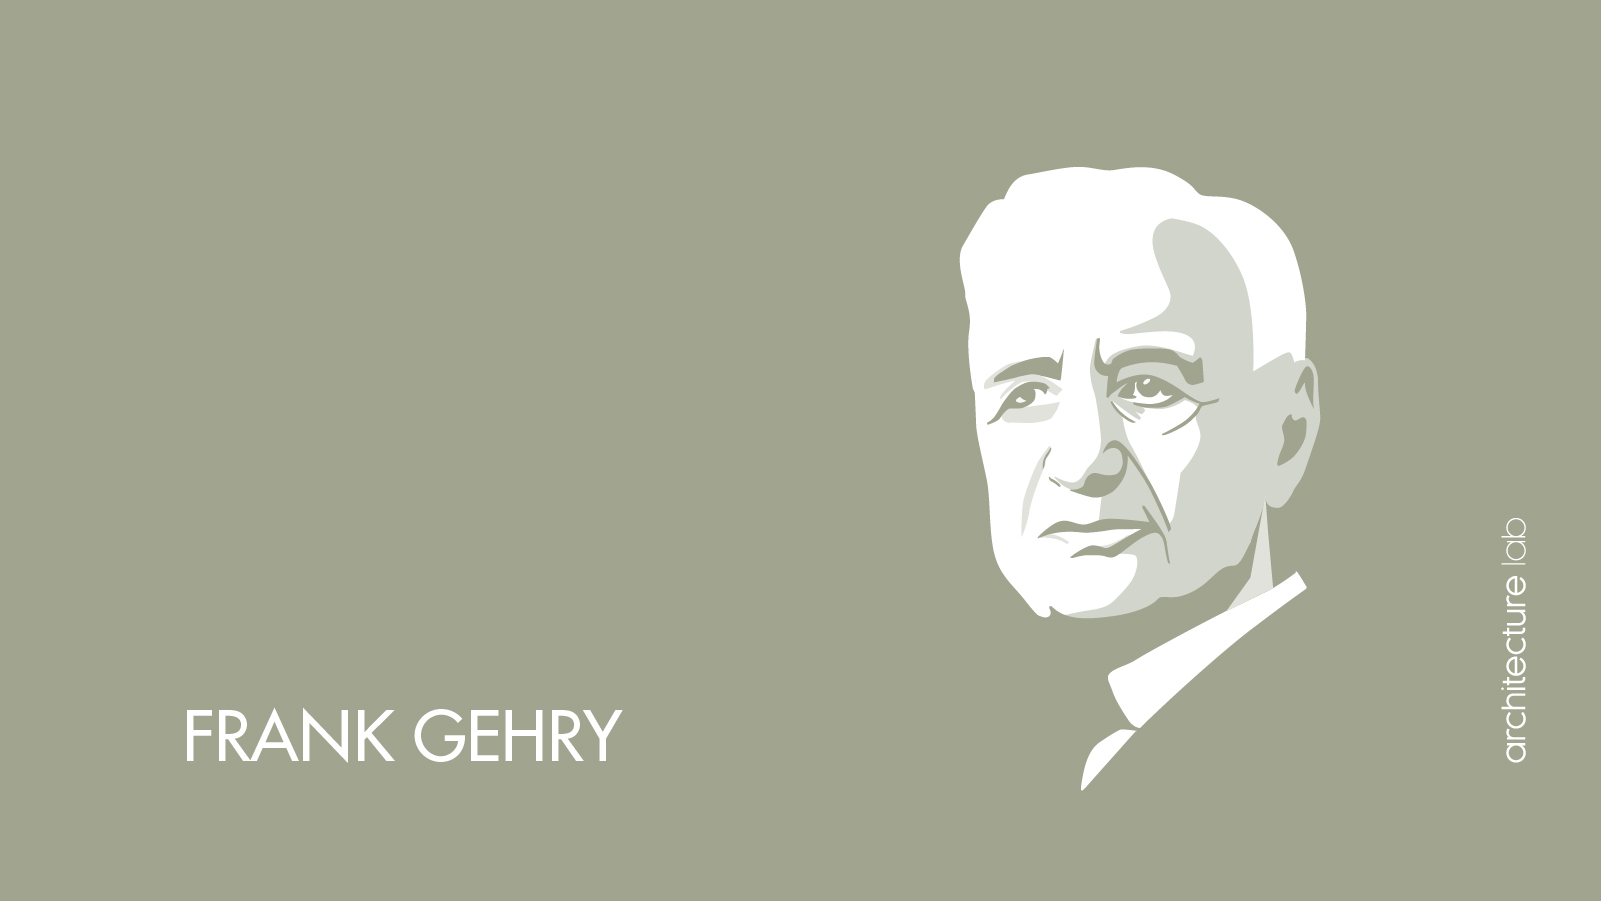 2. Frank gehry